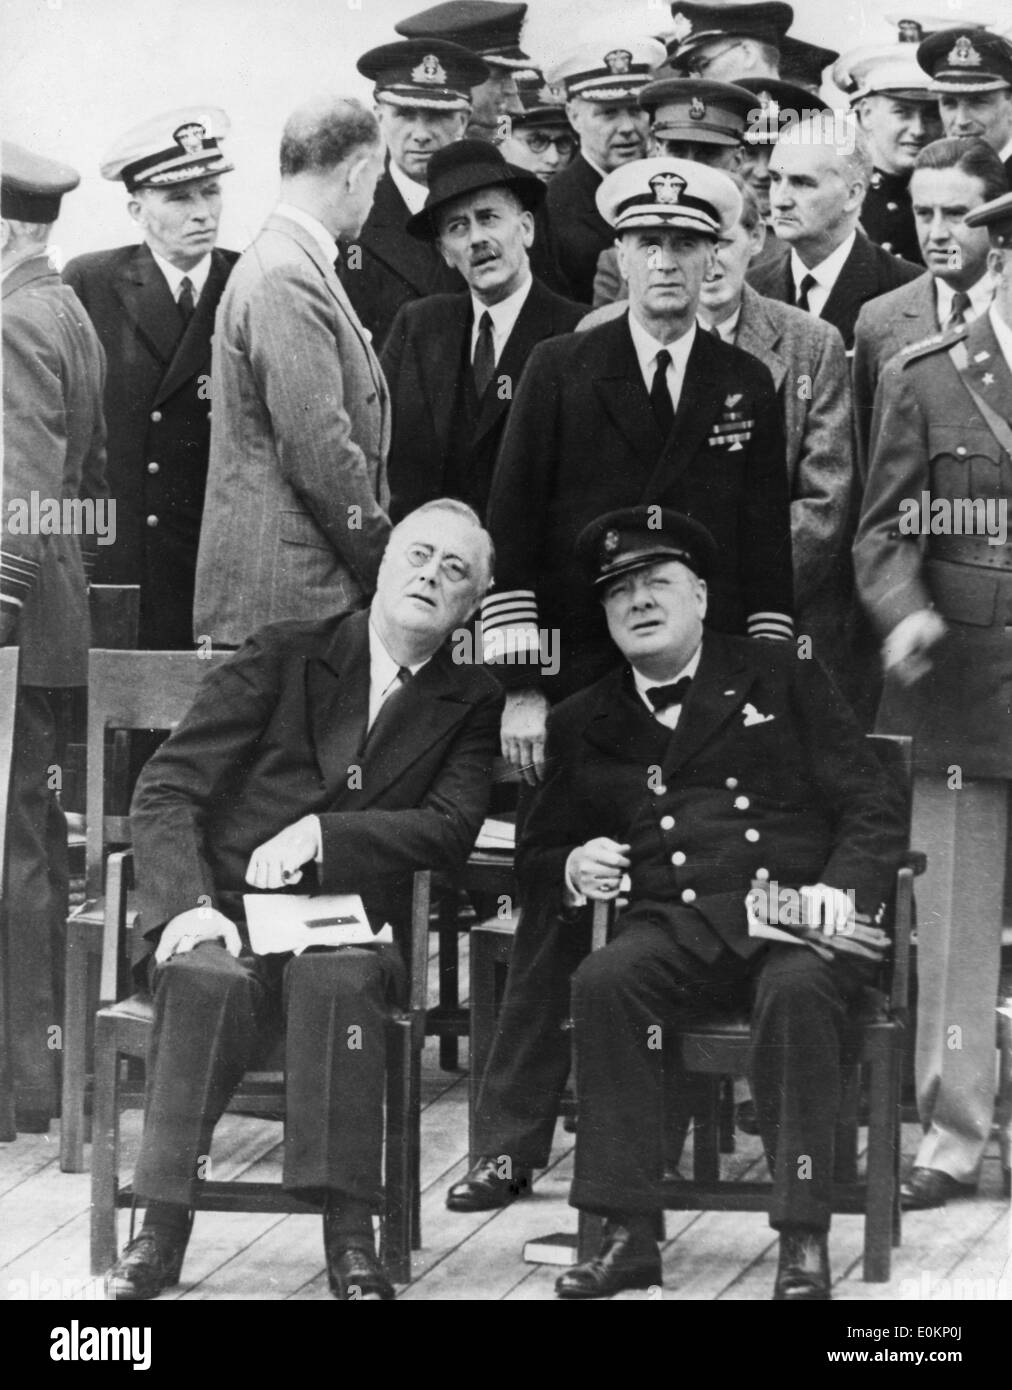 Sir Winston Churchill and President Franklin D. Roosevelt on board a ship Stock Photo